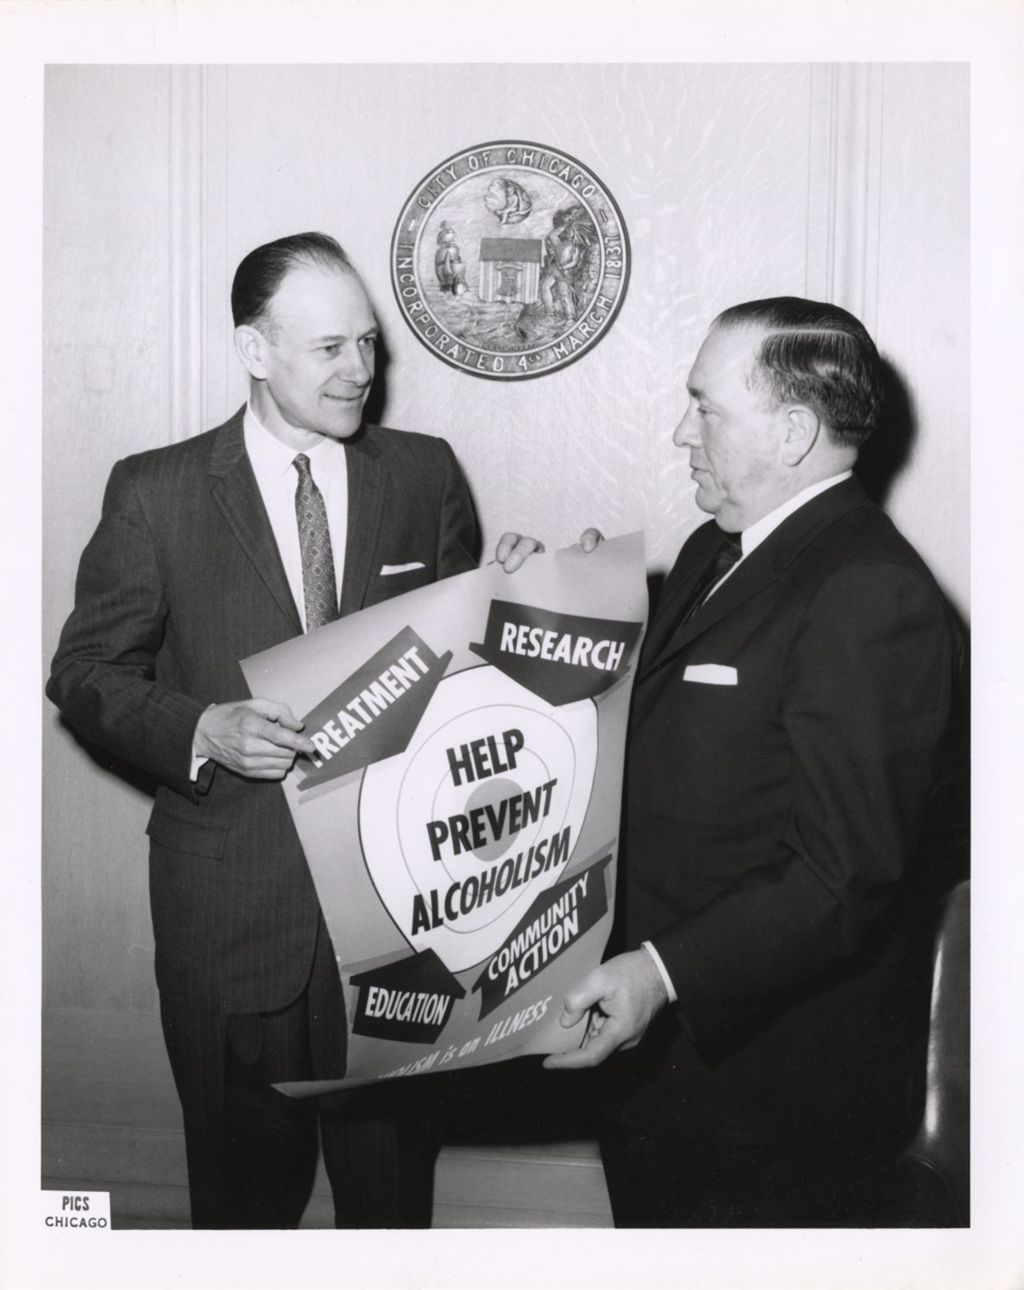 Miniature of Richard J. Daley with alcoholism prevention poster